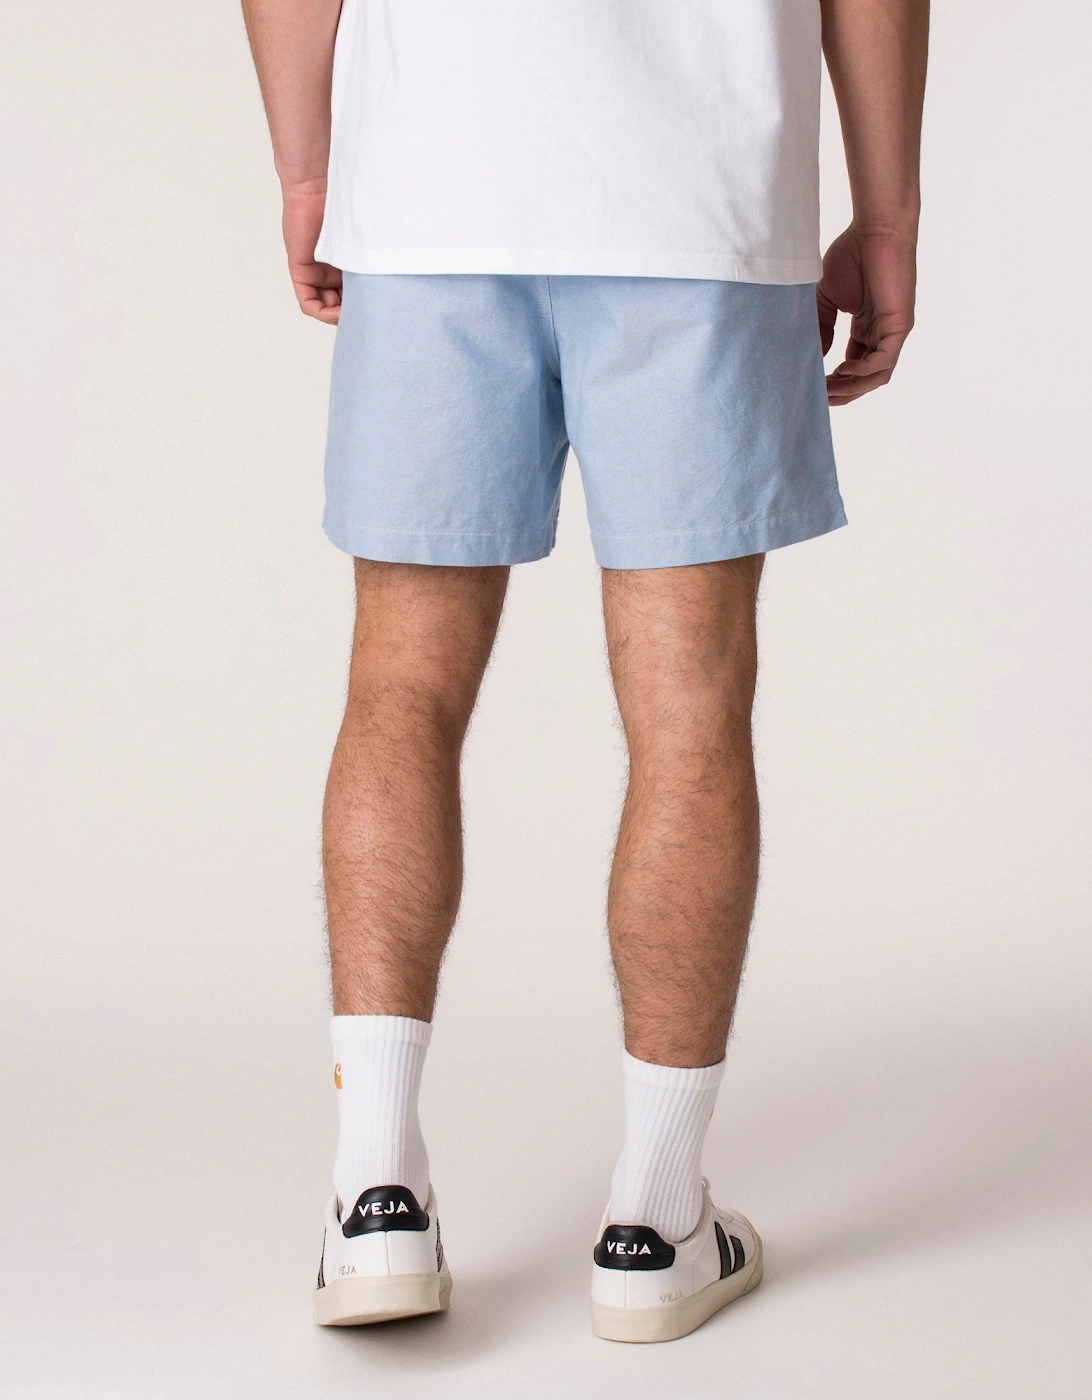 Classic Fit Polo Prepster Oxford Flat Shorts